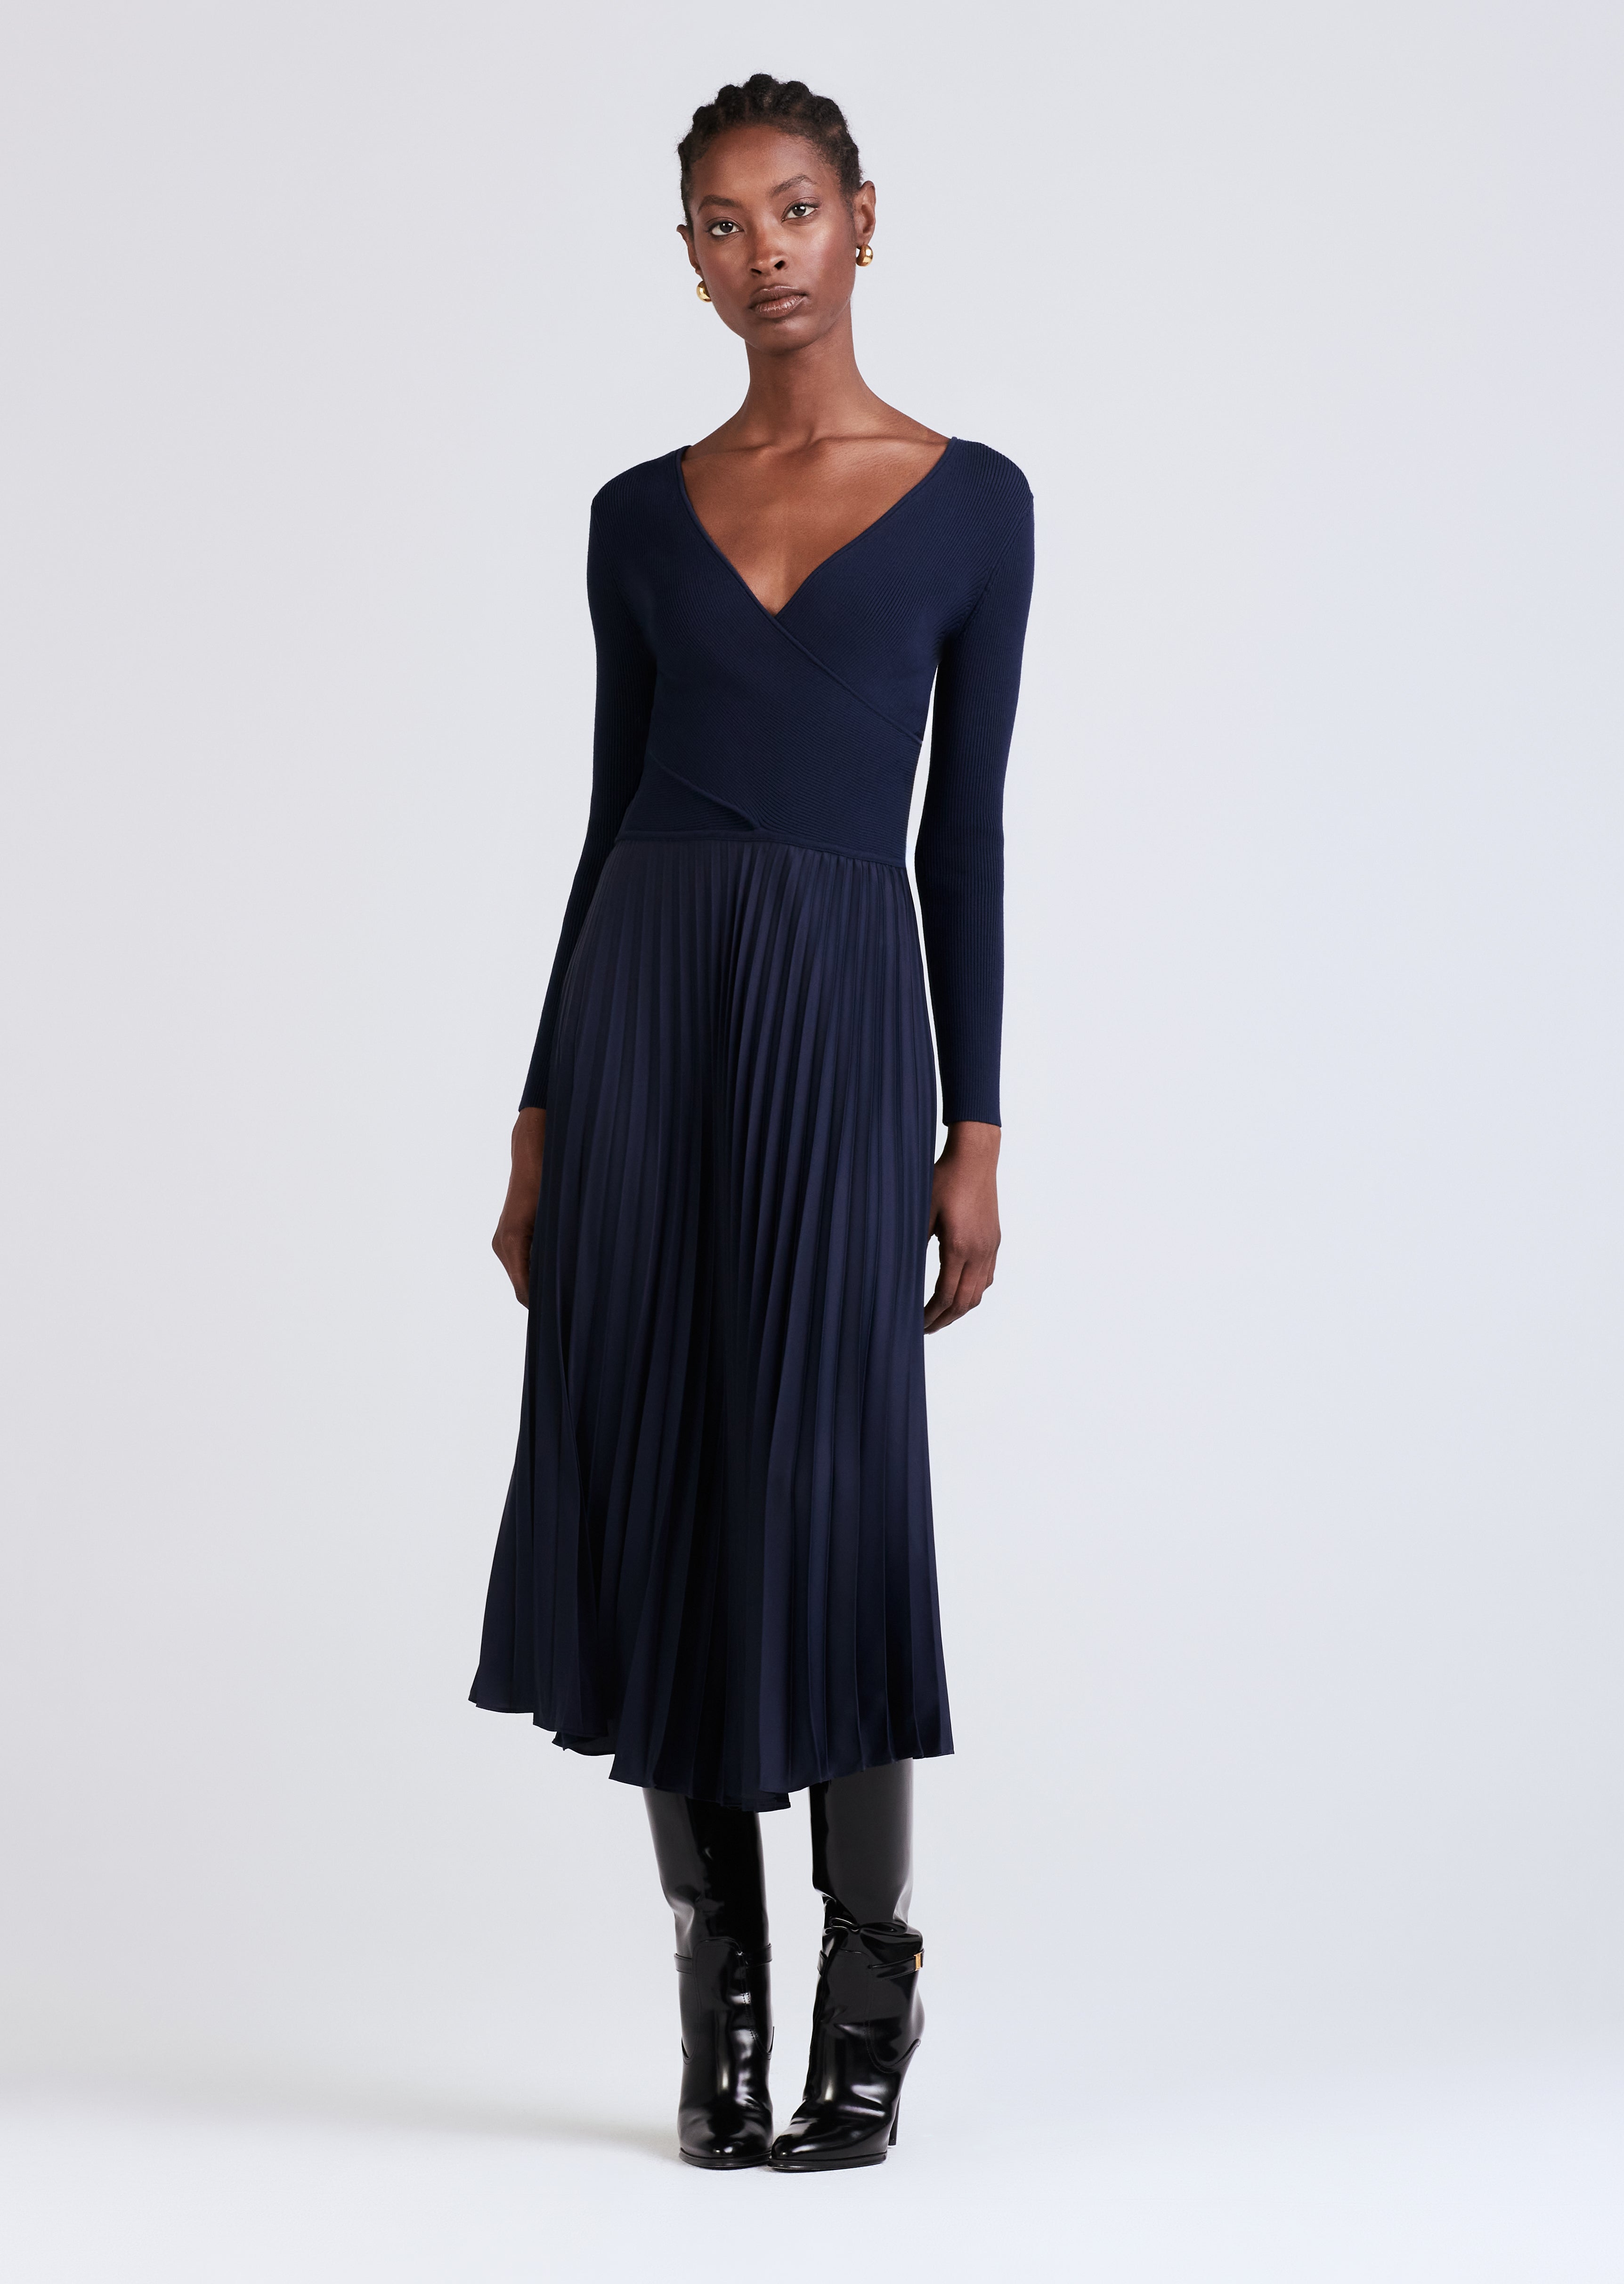 Rochelle Pleated Cami Dress